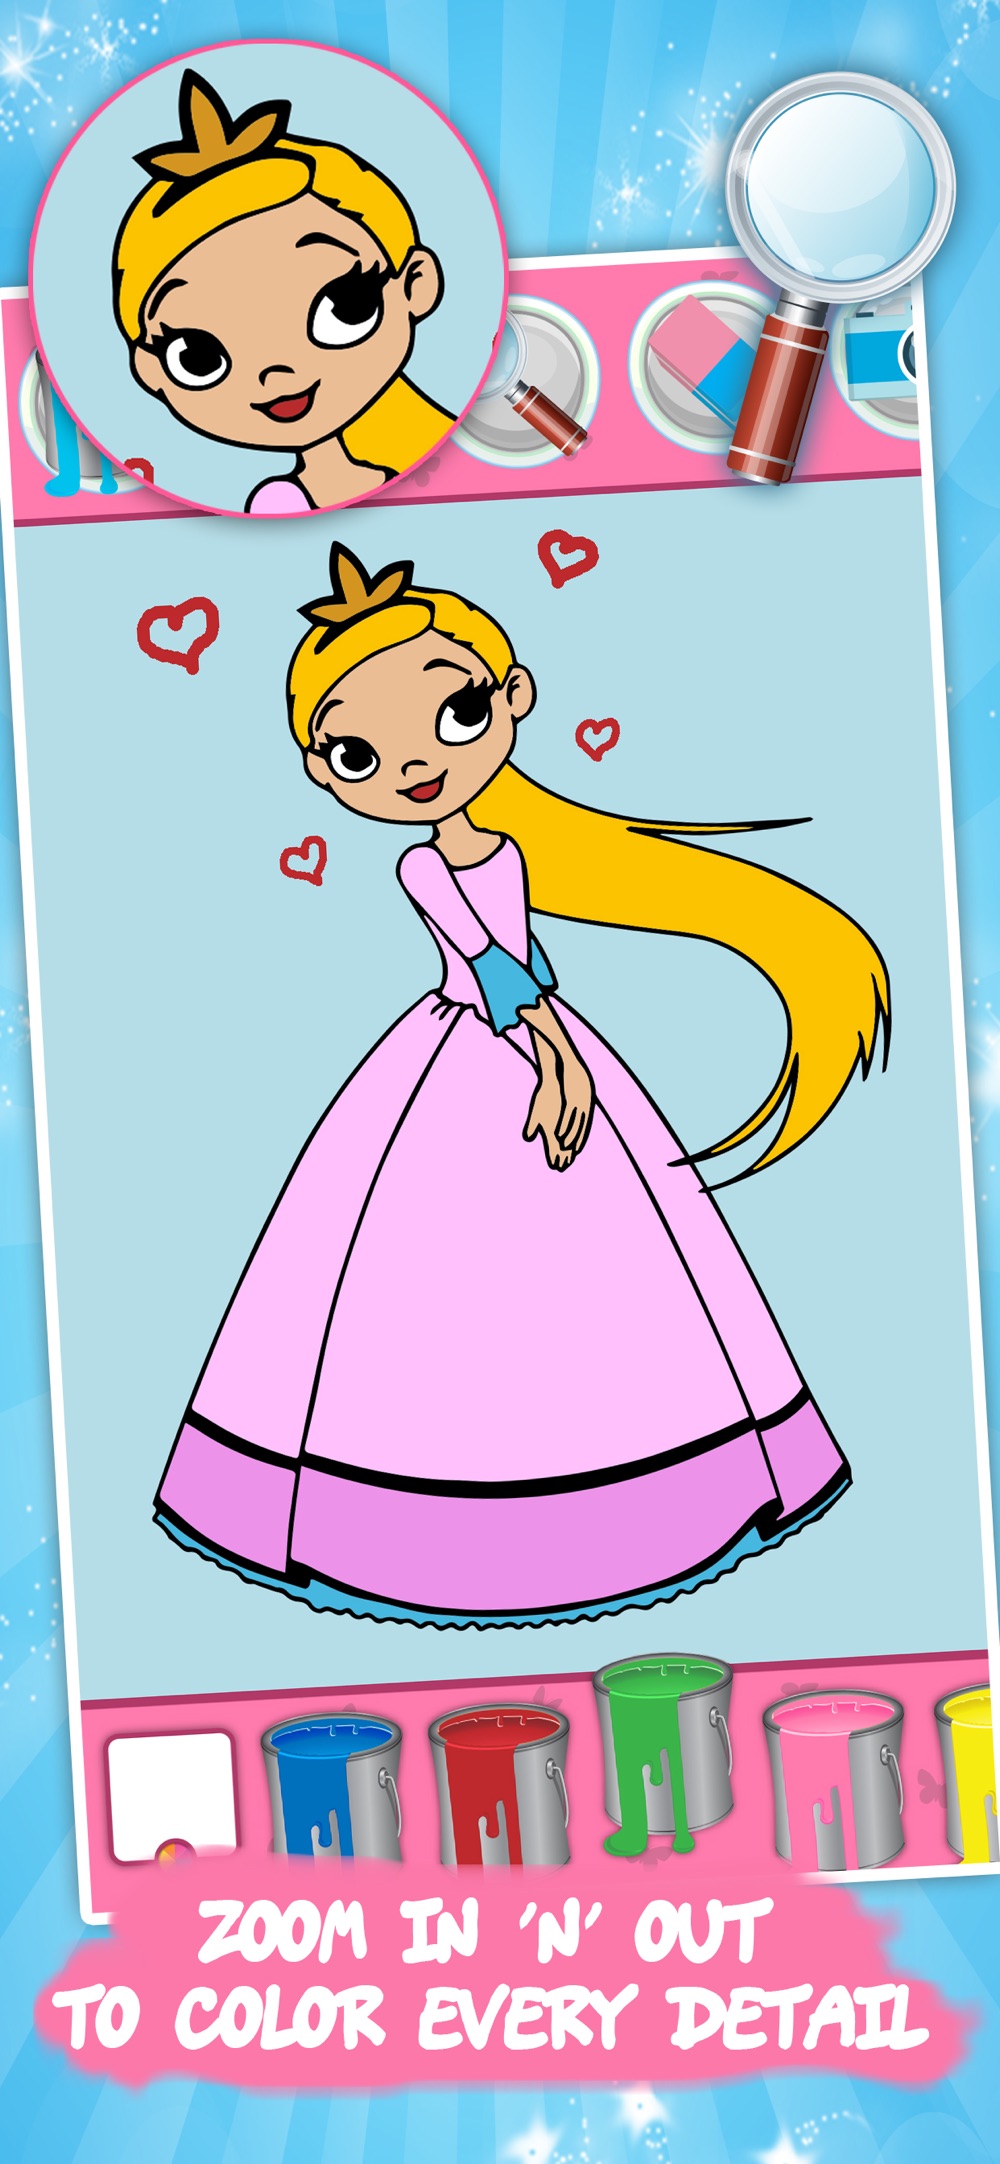 Download Best coloring book - Princess Cheat Codes - Aurora Cheats and Hacks